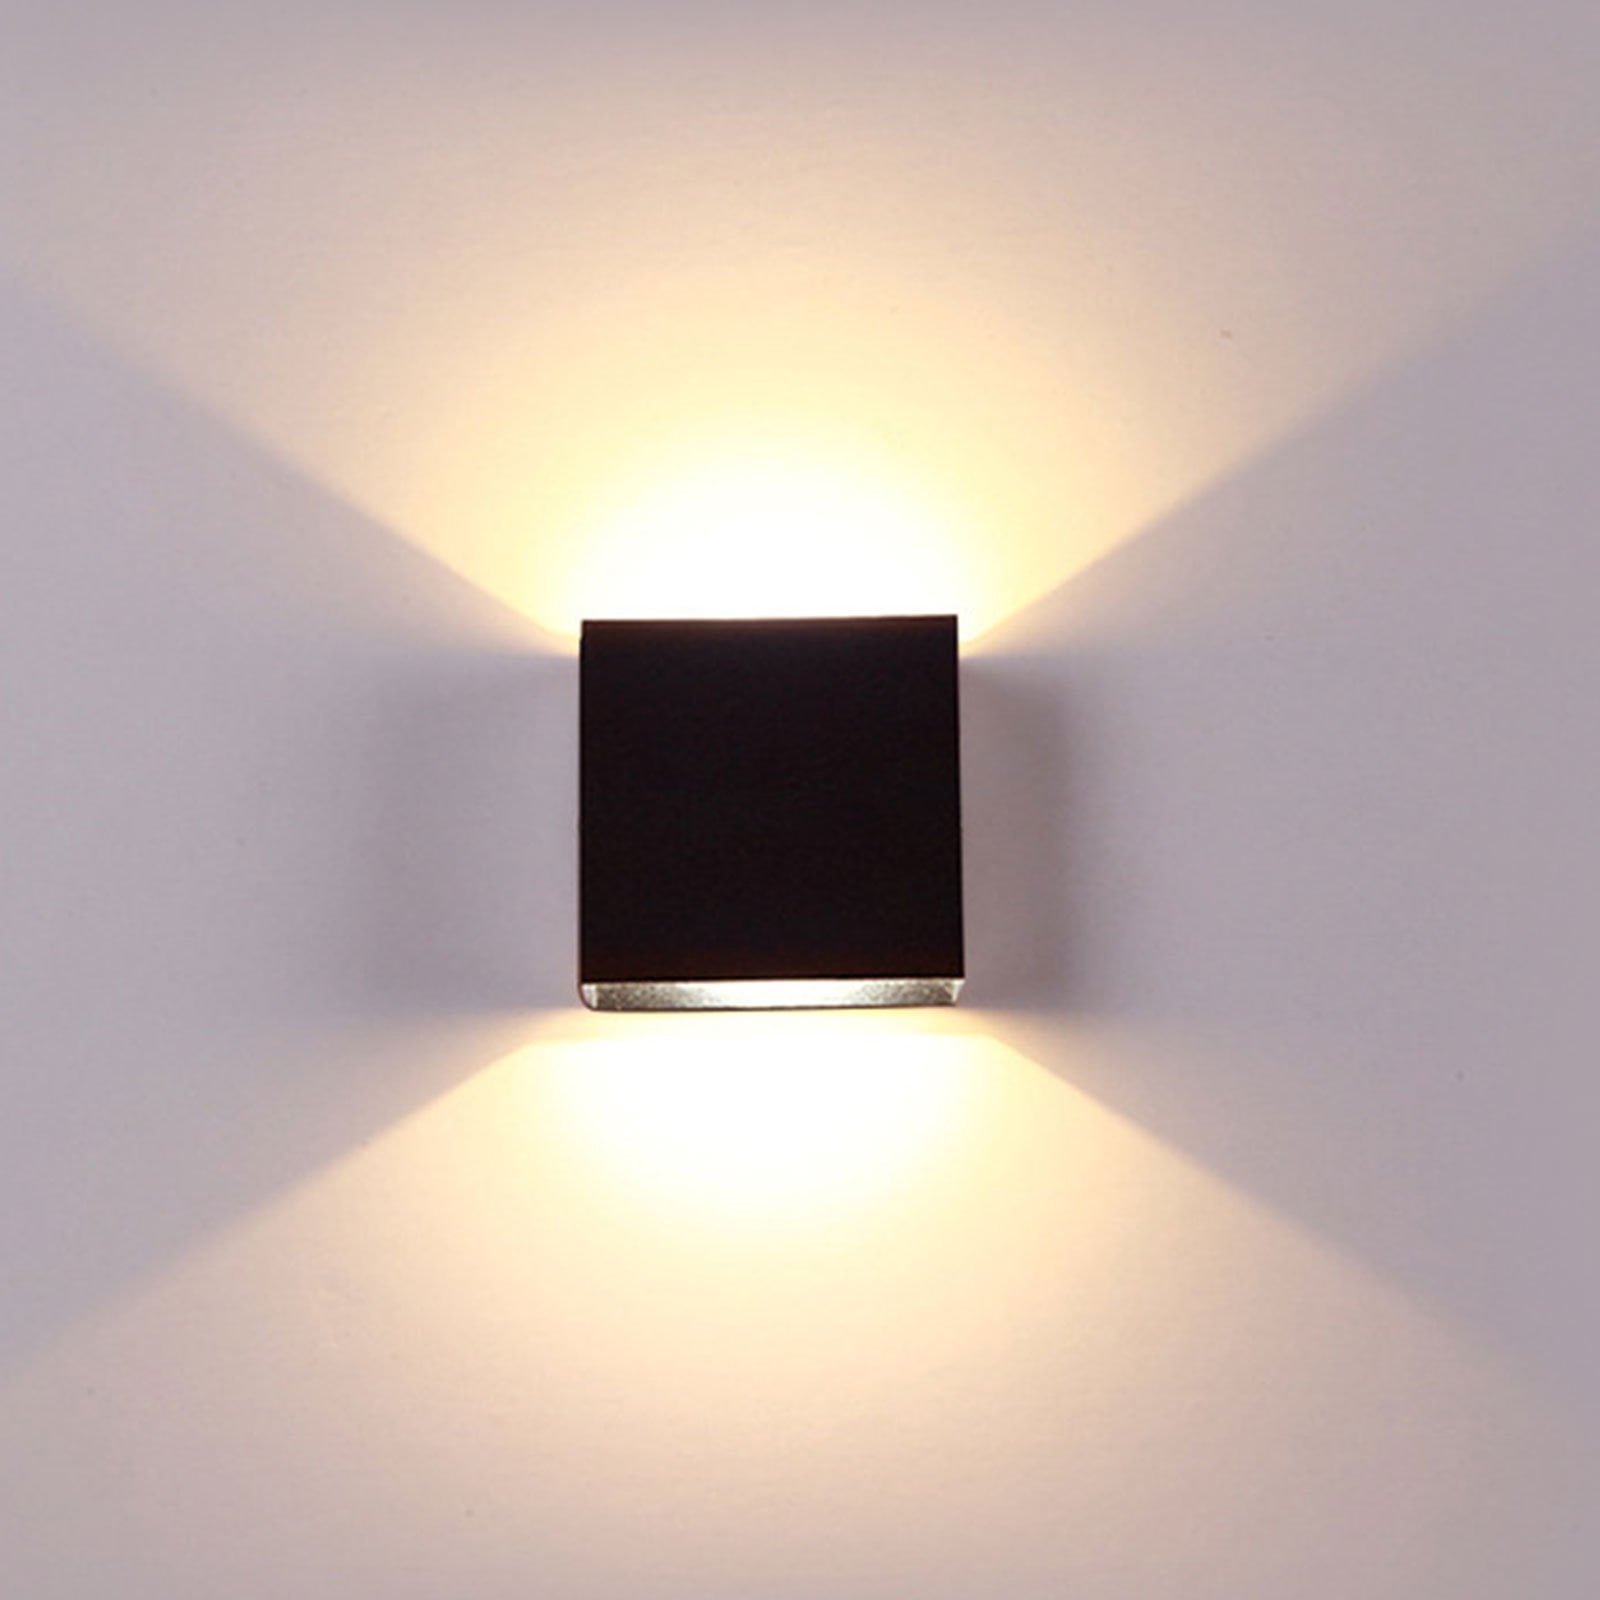 Modern LED Wall Light Up Down Cube Outdoor Indoor Sconce Lighting Lamp Fixture 